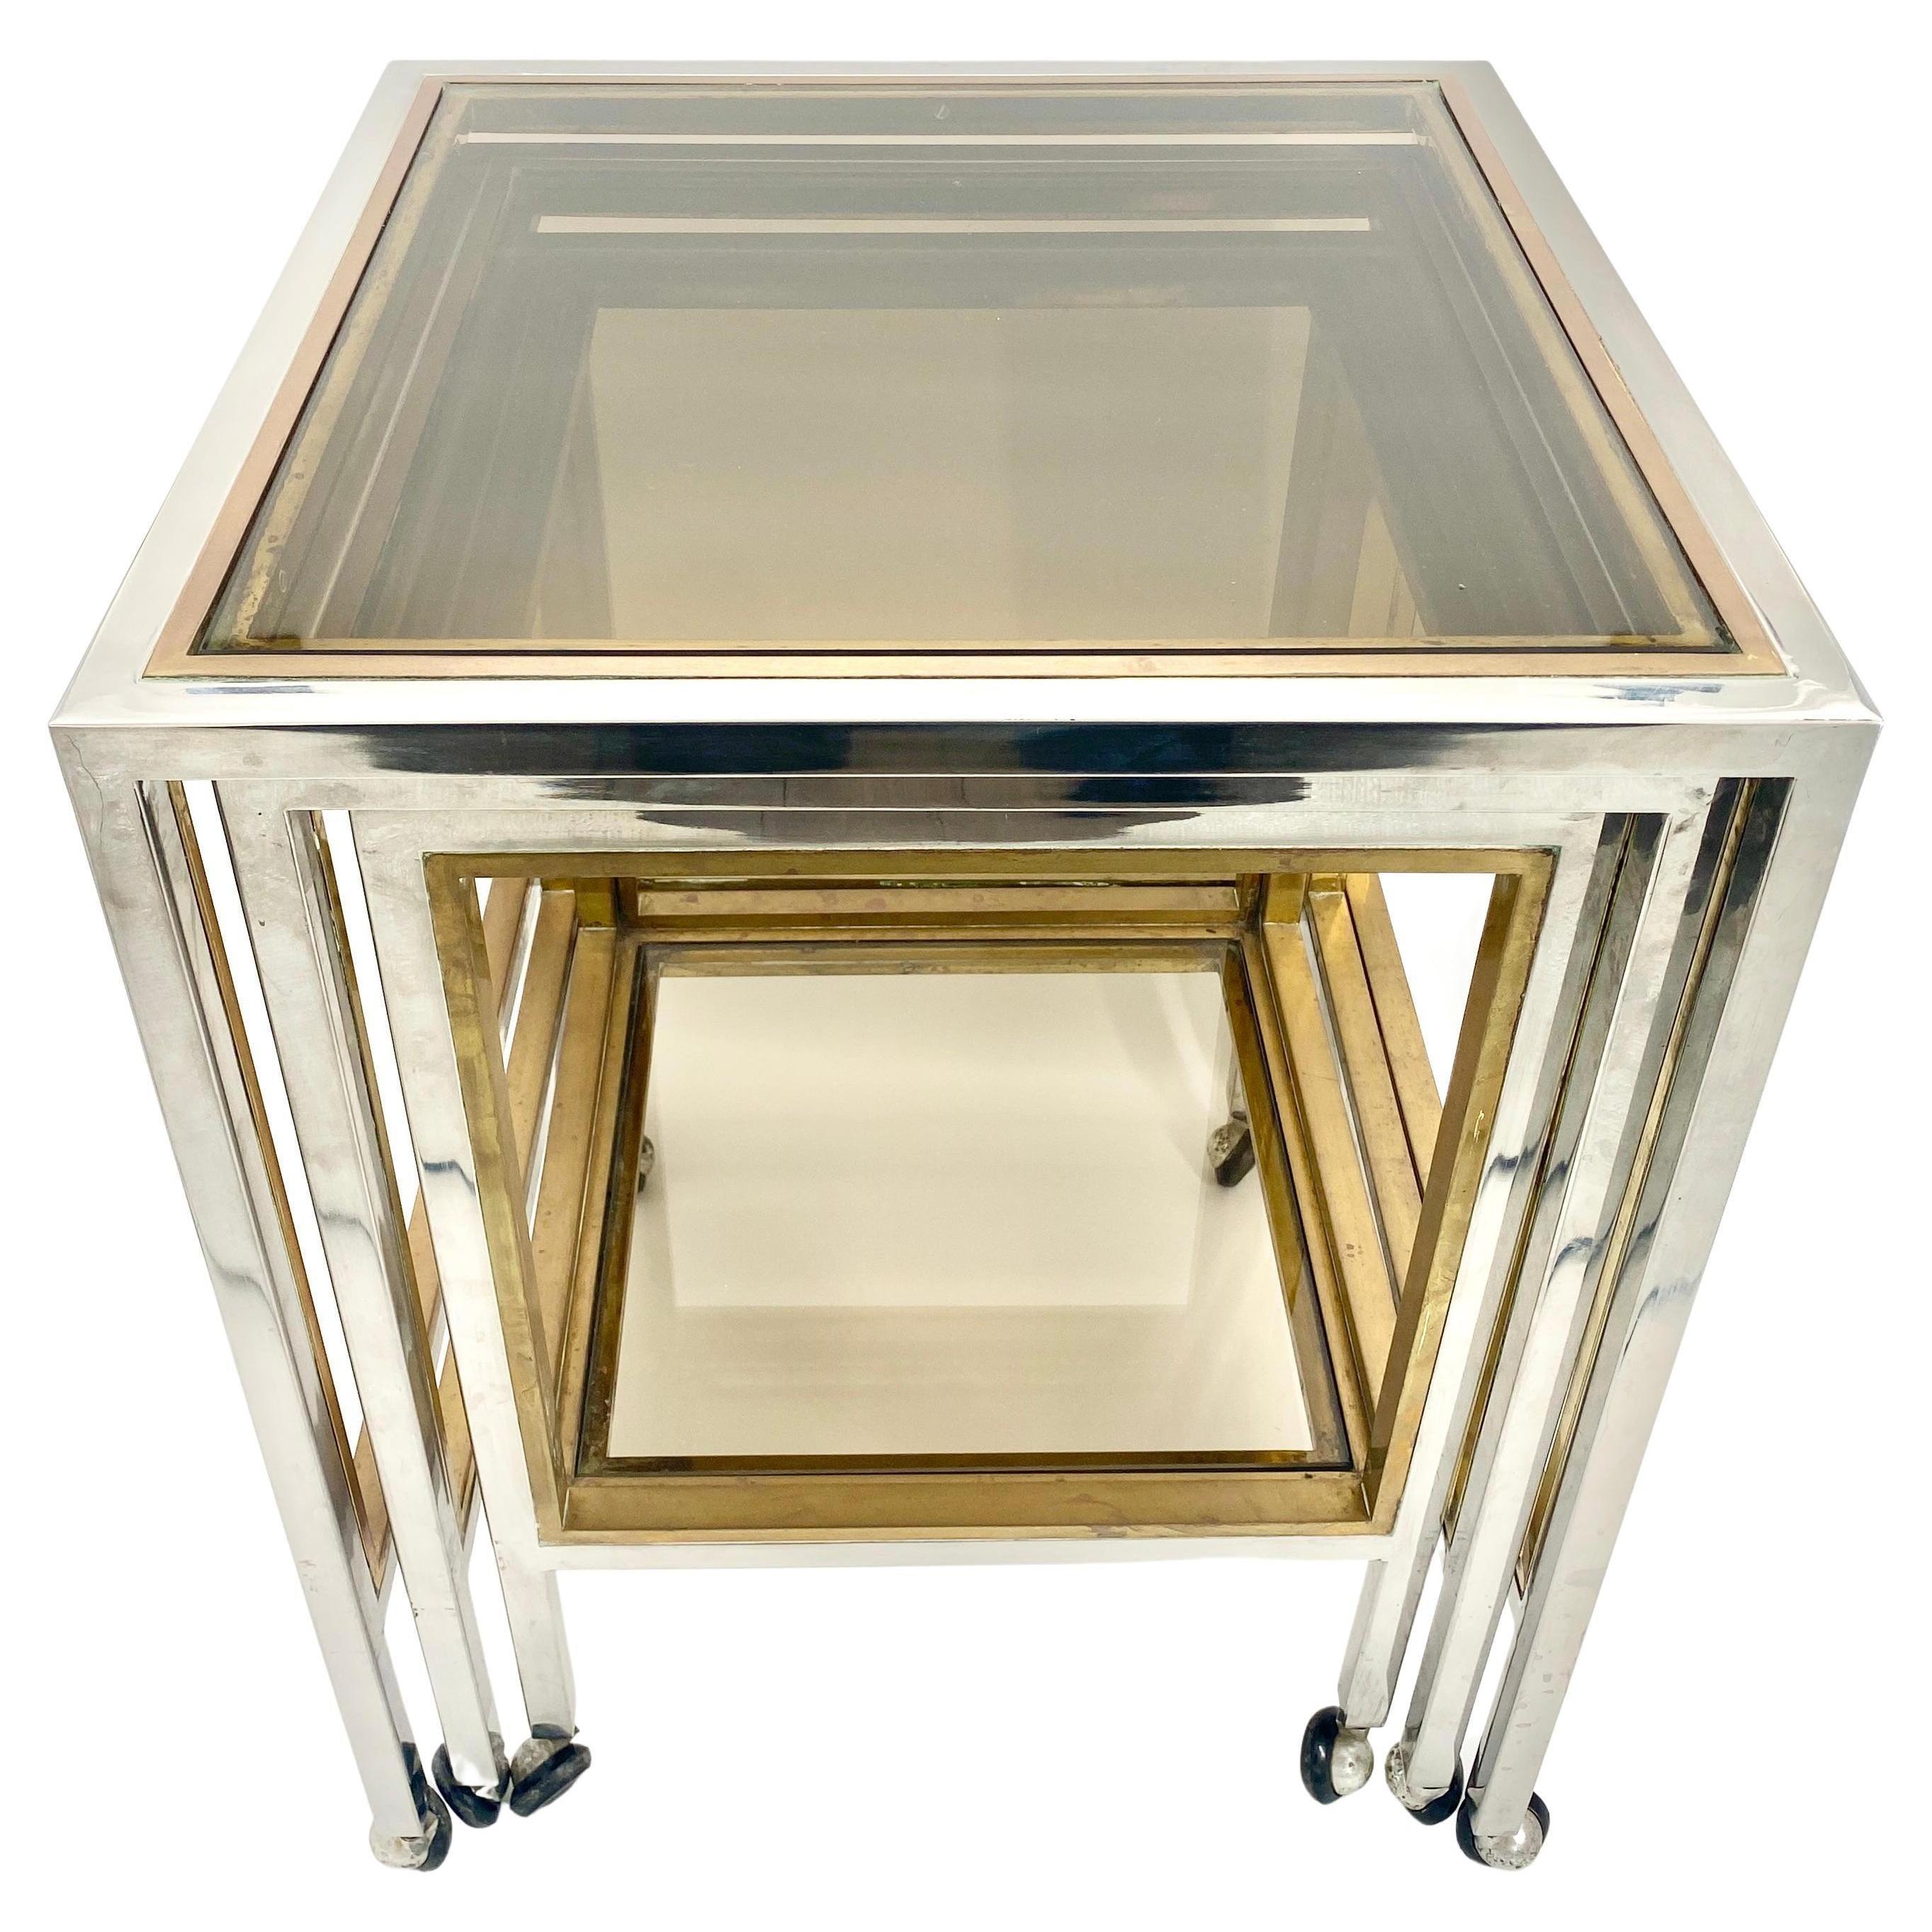 An original Romeo Rega Italian set of nesting tables on chrome, brass and smoked glass. The 3 tables are mounted on wheels with polished chrome frame that is edged in brass in the Hollywood Regency style. With the flexible design the 3 tables can be